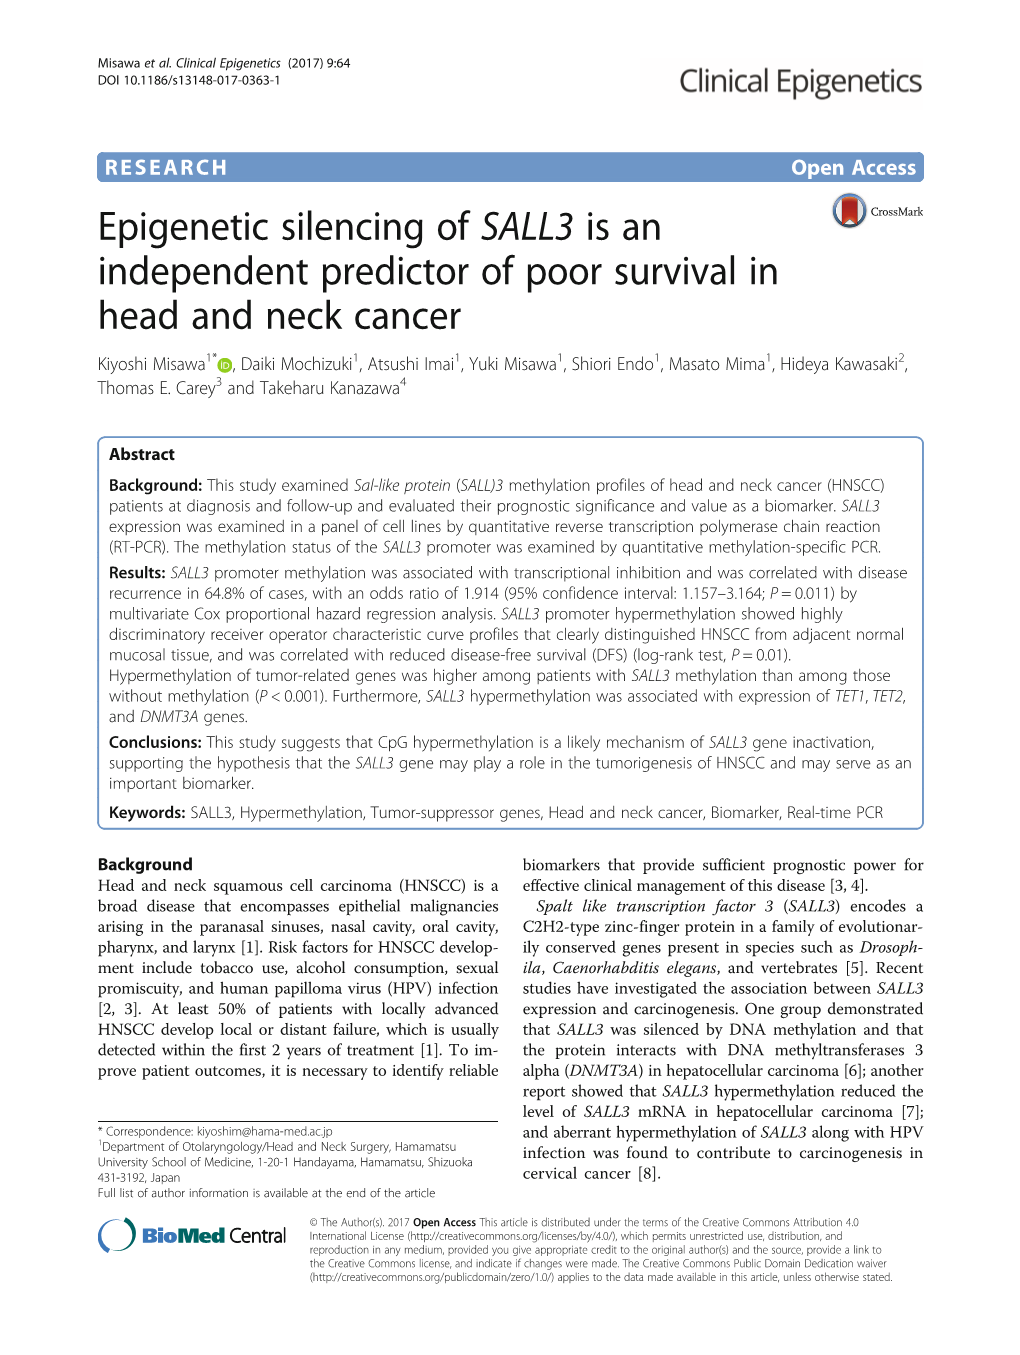 Epigenetic Silencing of SALL3 Is an Independent Predictor of Poor